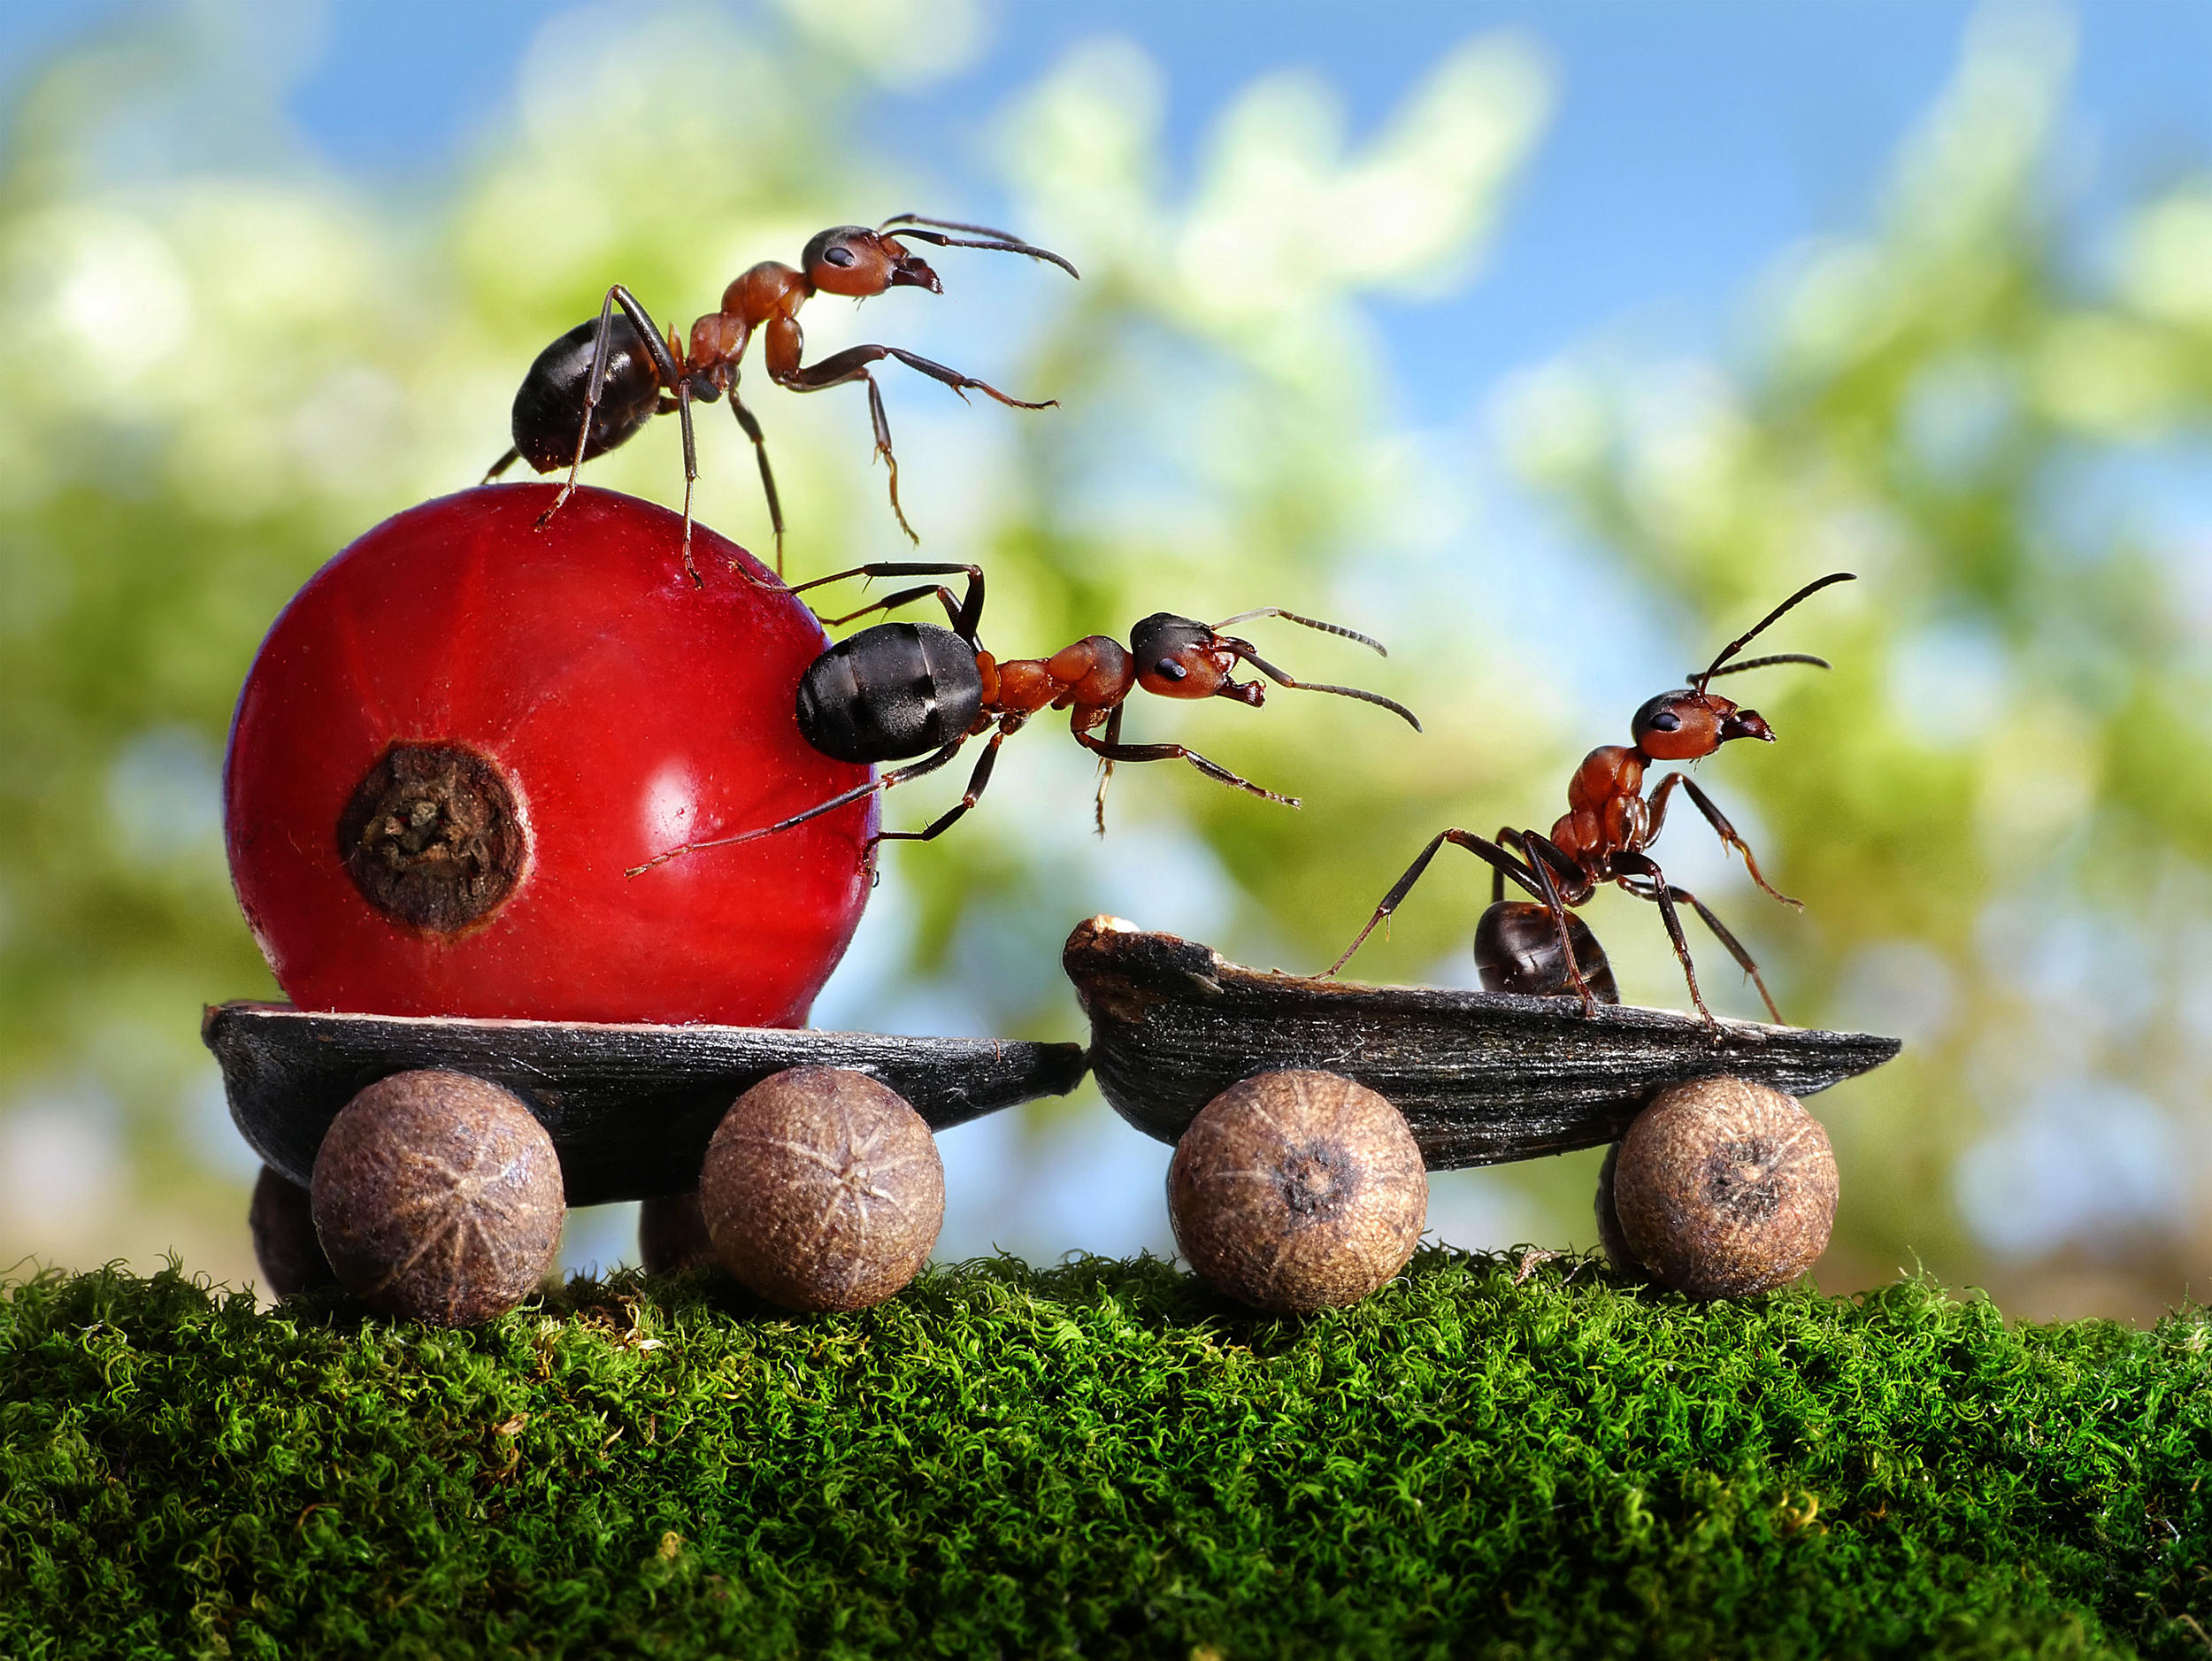 Nature Insect Macro Depth Of Field Photoshop Seeds Fruit Ants Red Currant Moss 2500x1877